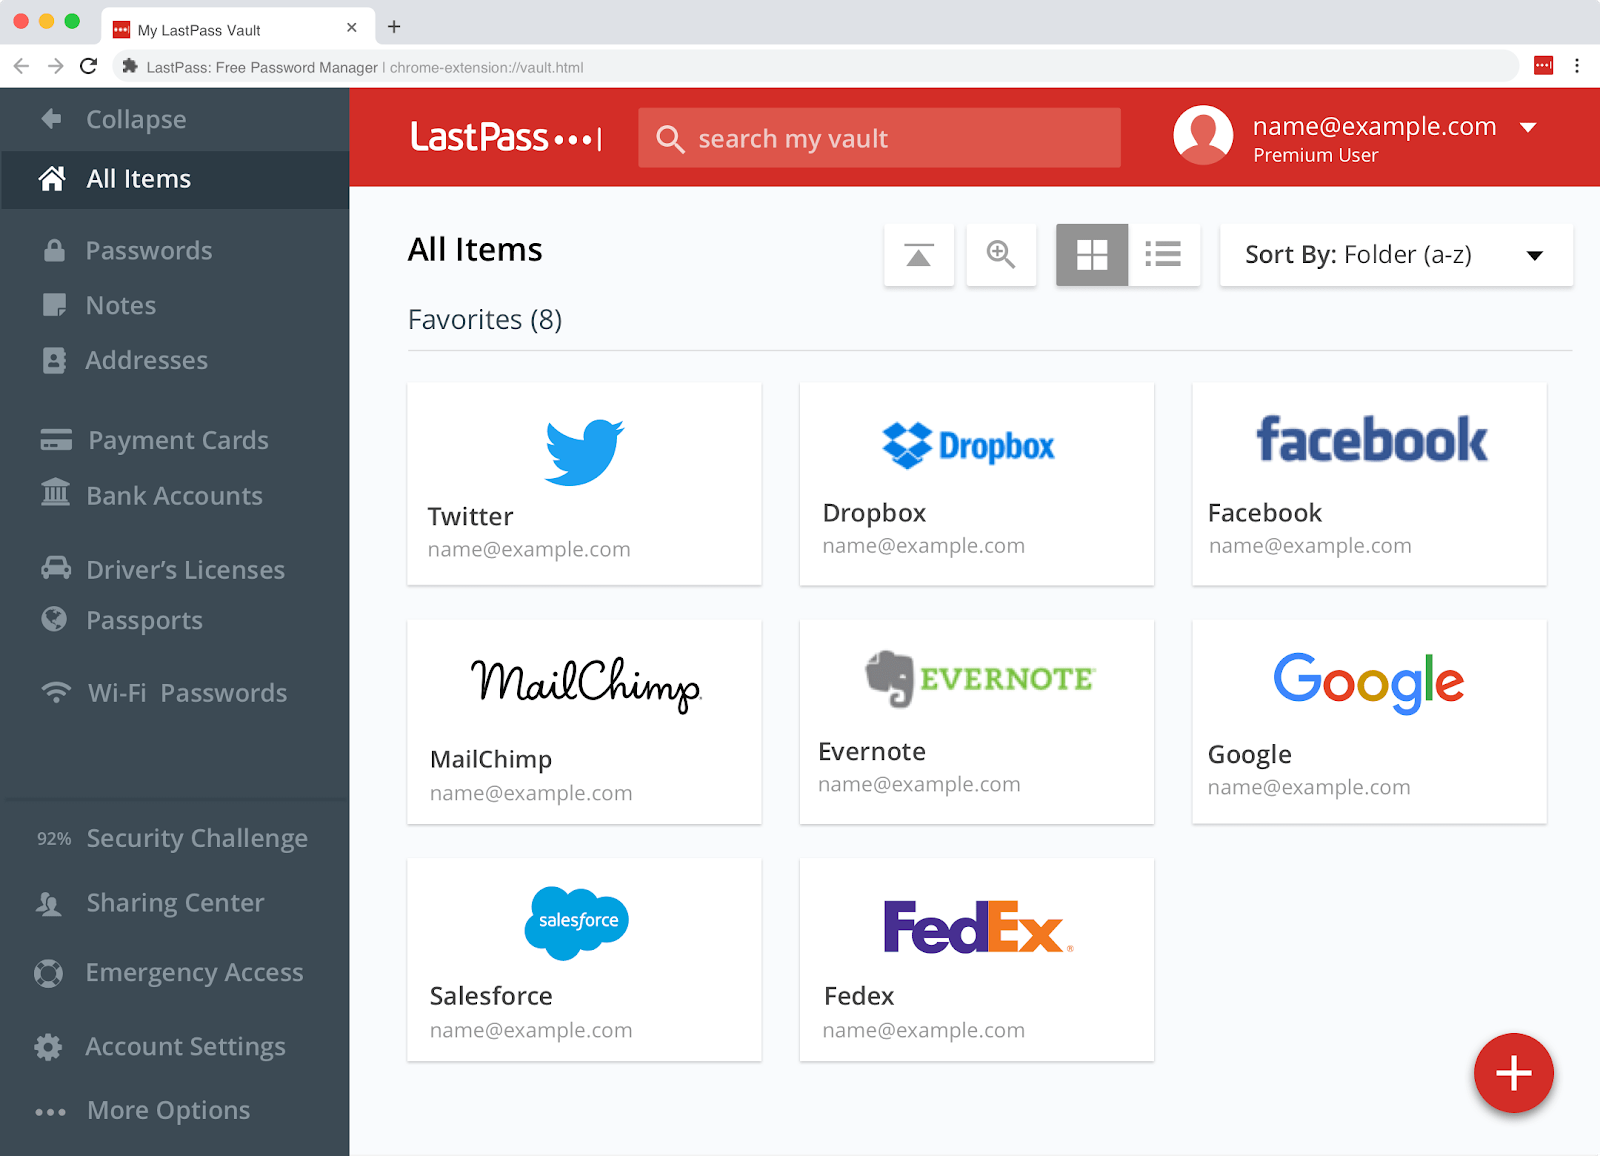 Password managers such as LastPass are great simple password management tools